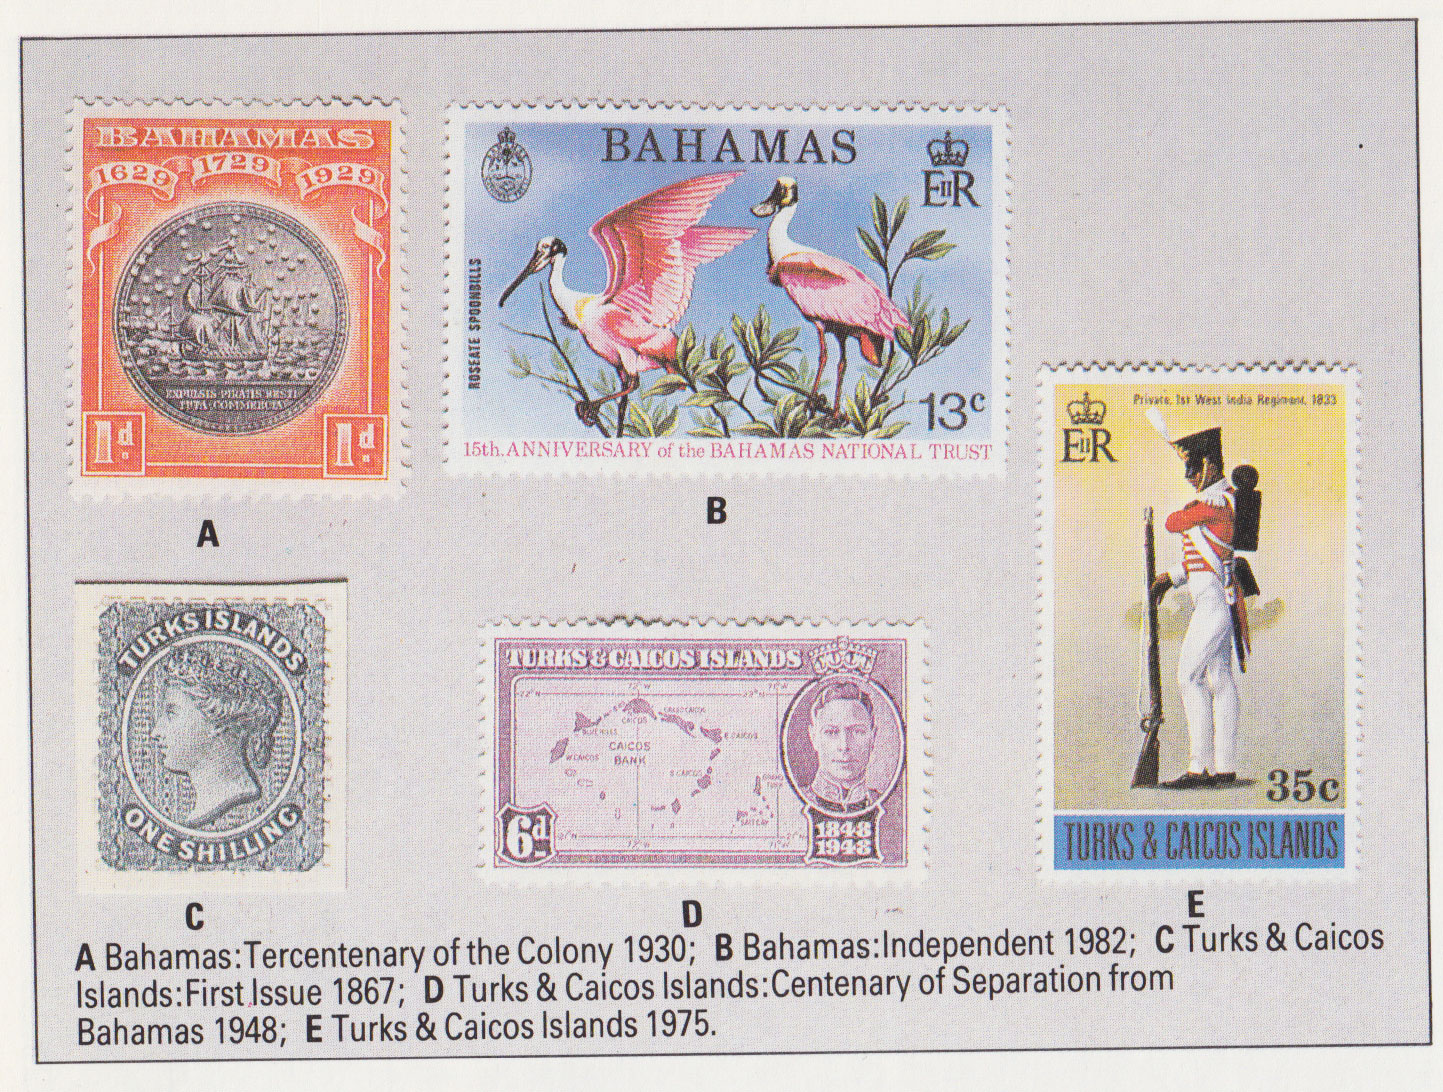 Bahamas Turks and Caicos stamps